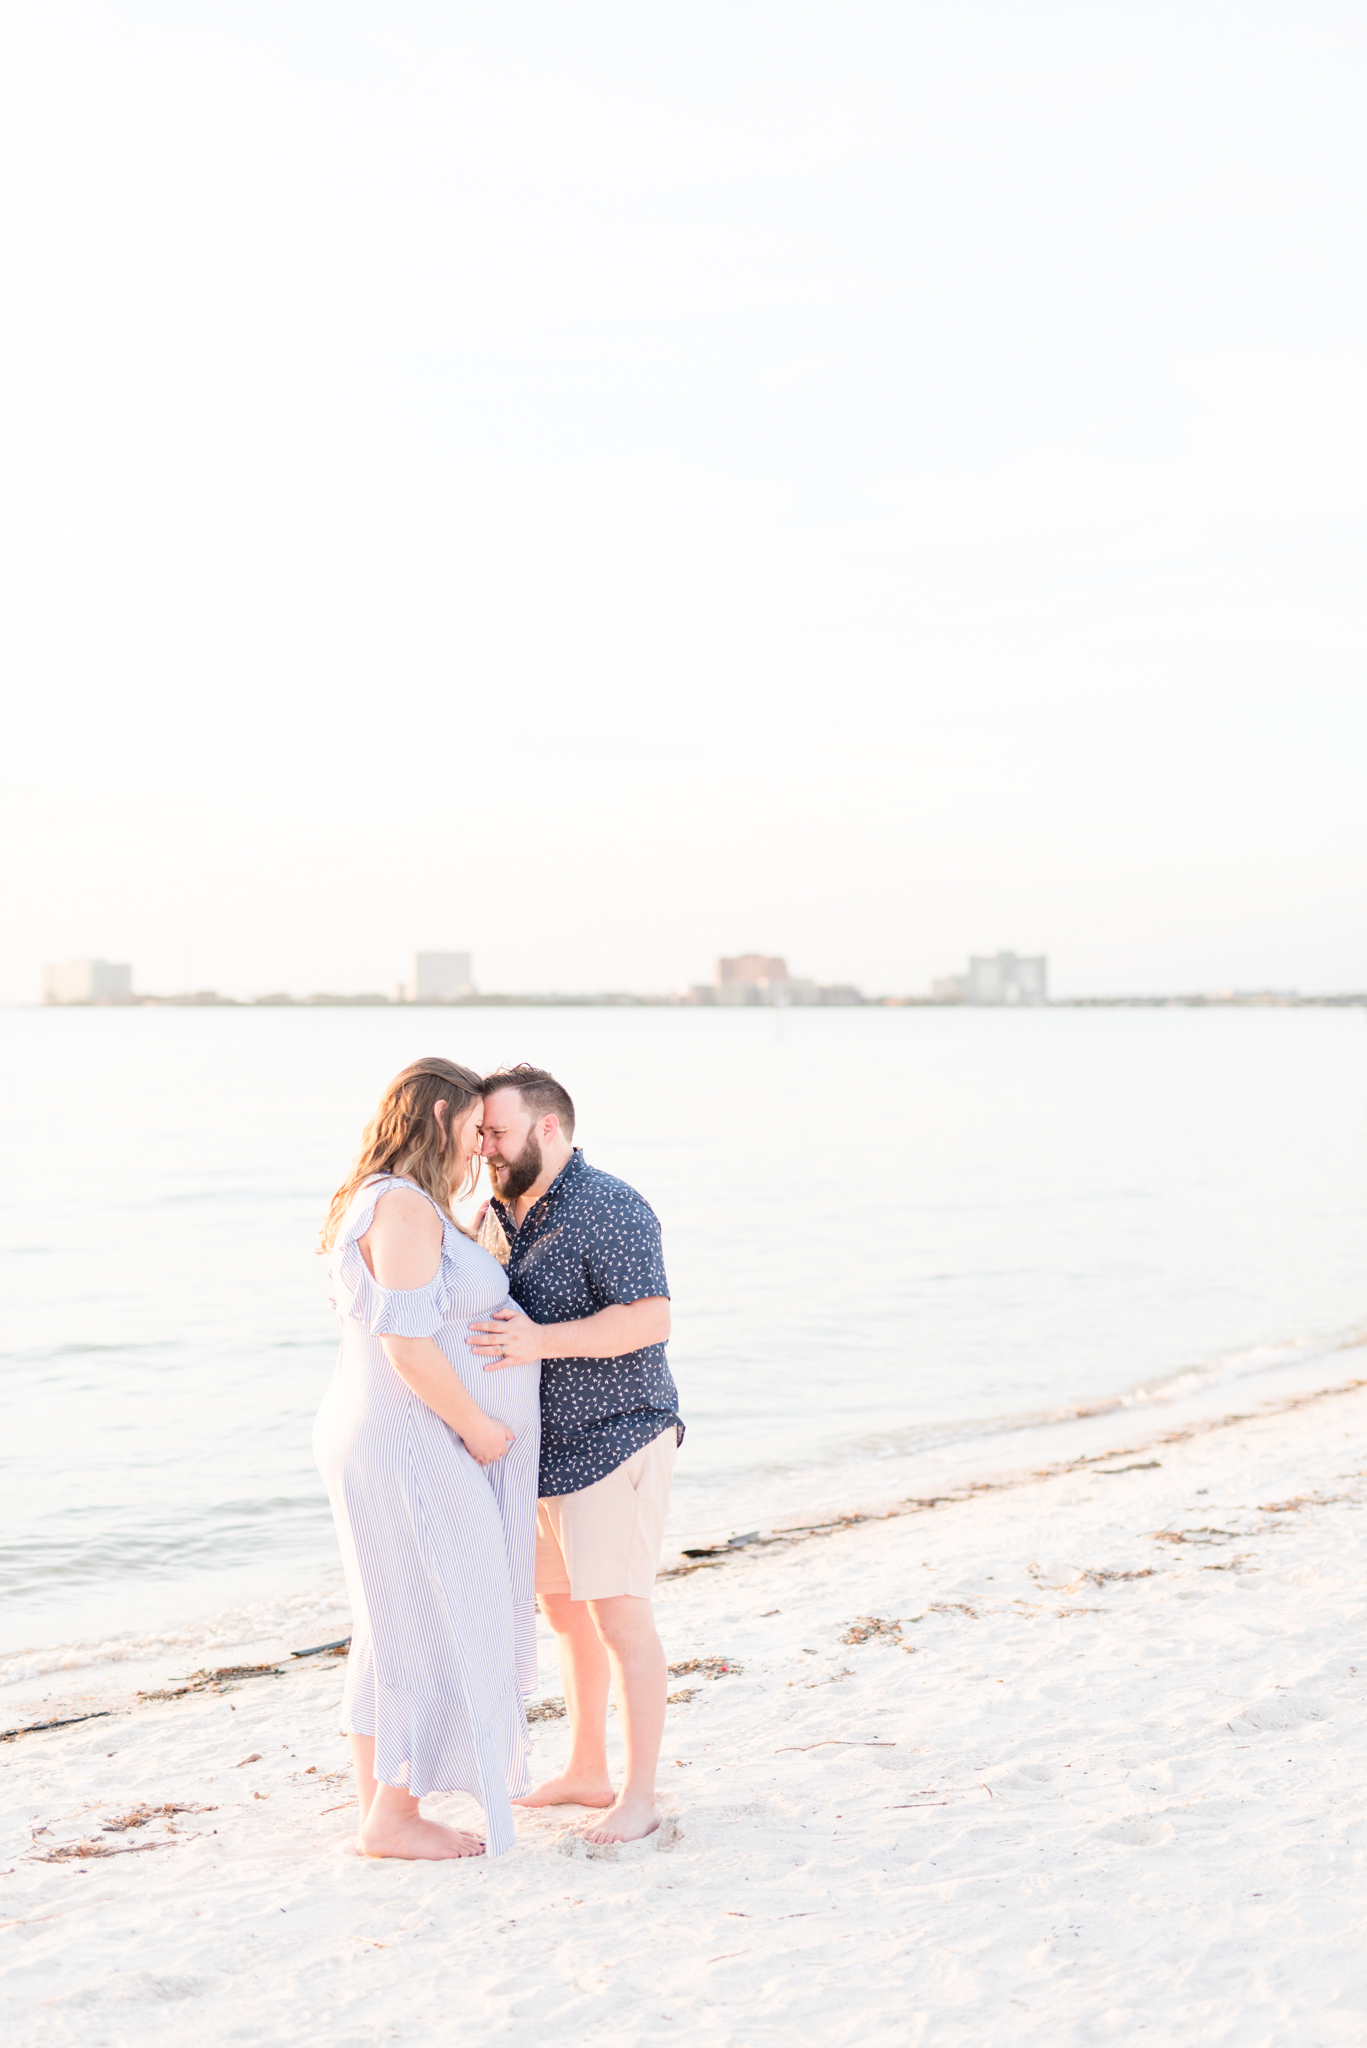 Tampa couple cuddles on beach during maternity session.